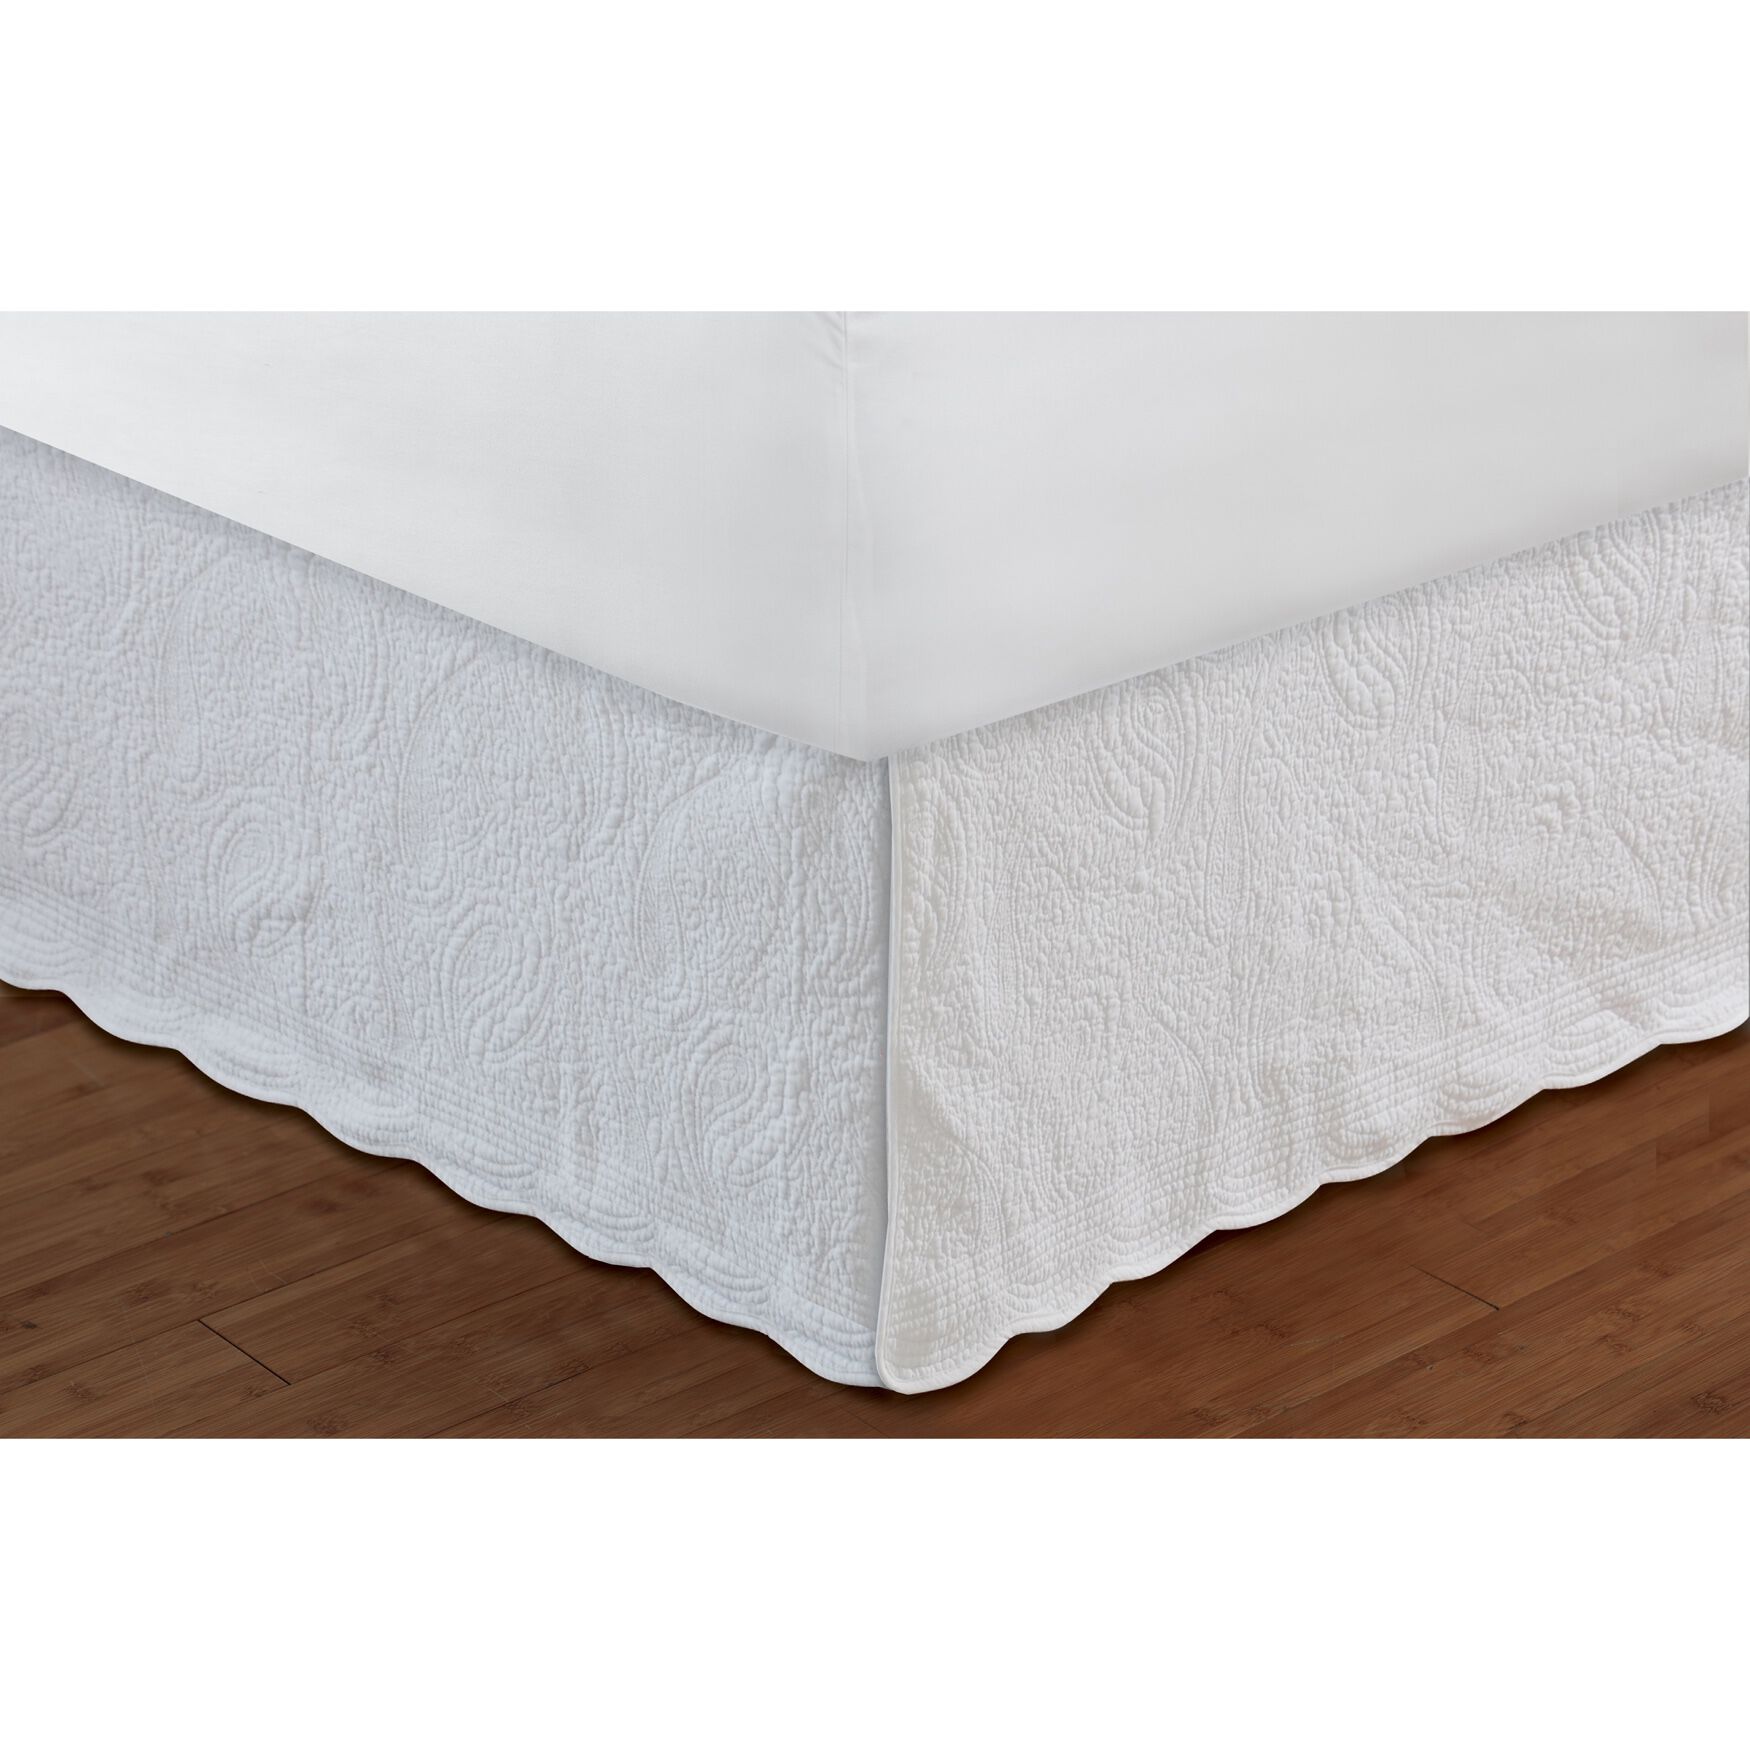 Greenland Home Cotton Voile Dust Ruffle, 18-inch L, White